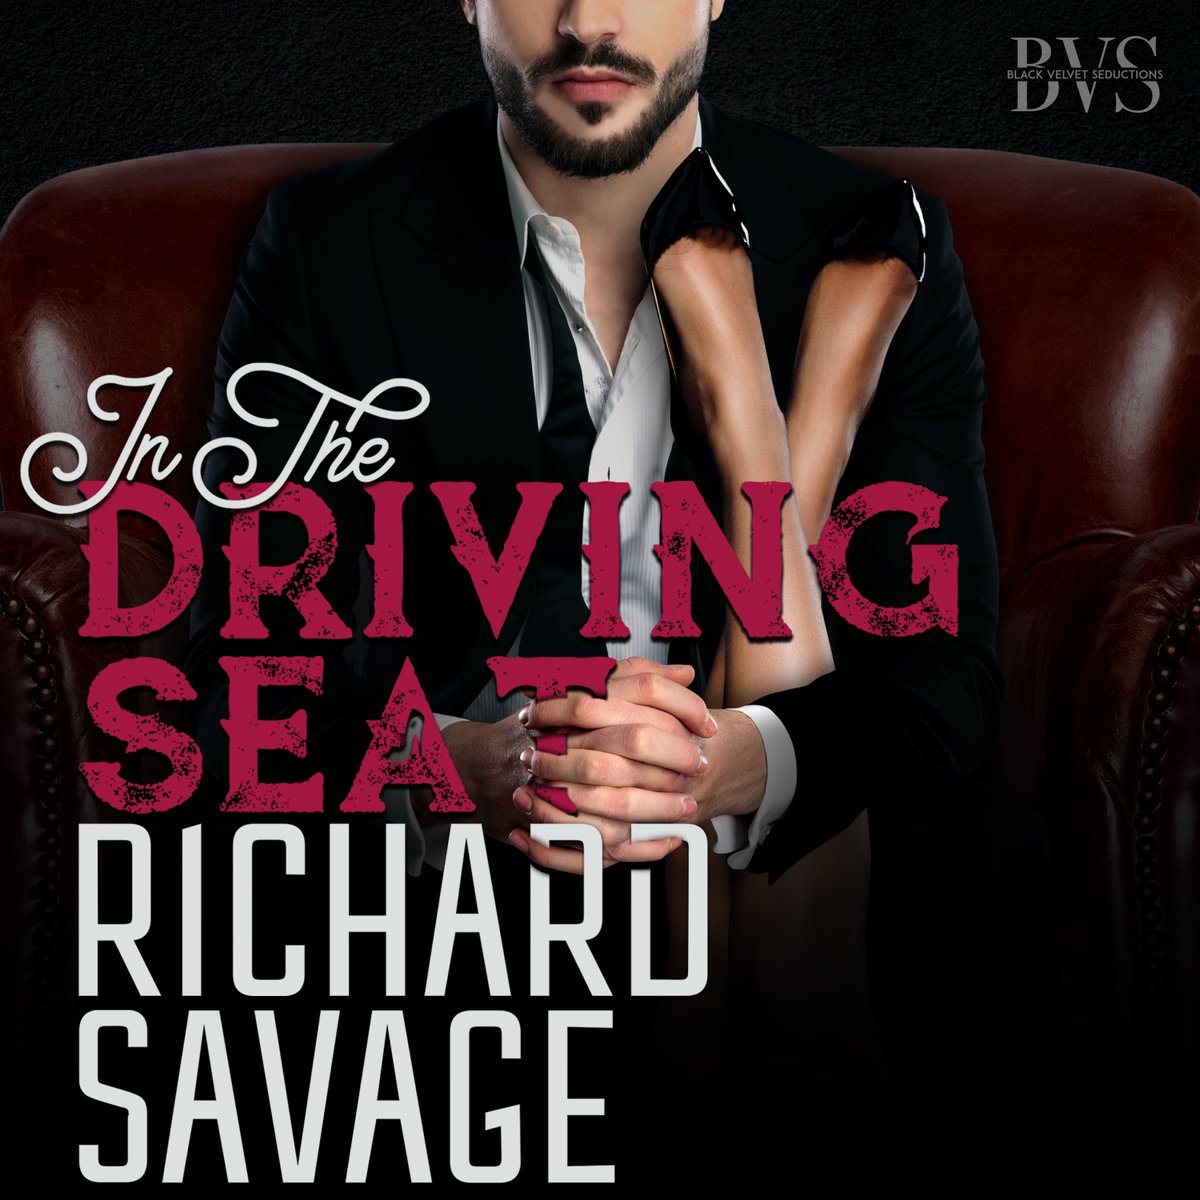 In The Driving Seat By Richard Savage
amzn.to/2E8J9qu
Sometimes the cost of a pair of shoes can be way higher than you think!
#domesticdiscipline #romancereaders #amreadingromance #kinkyromance